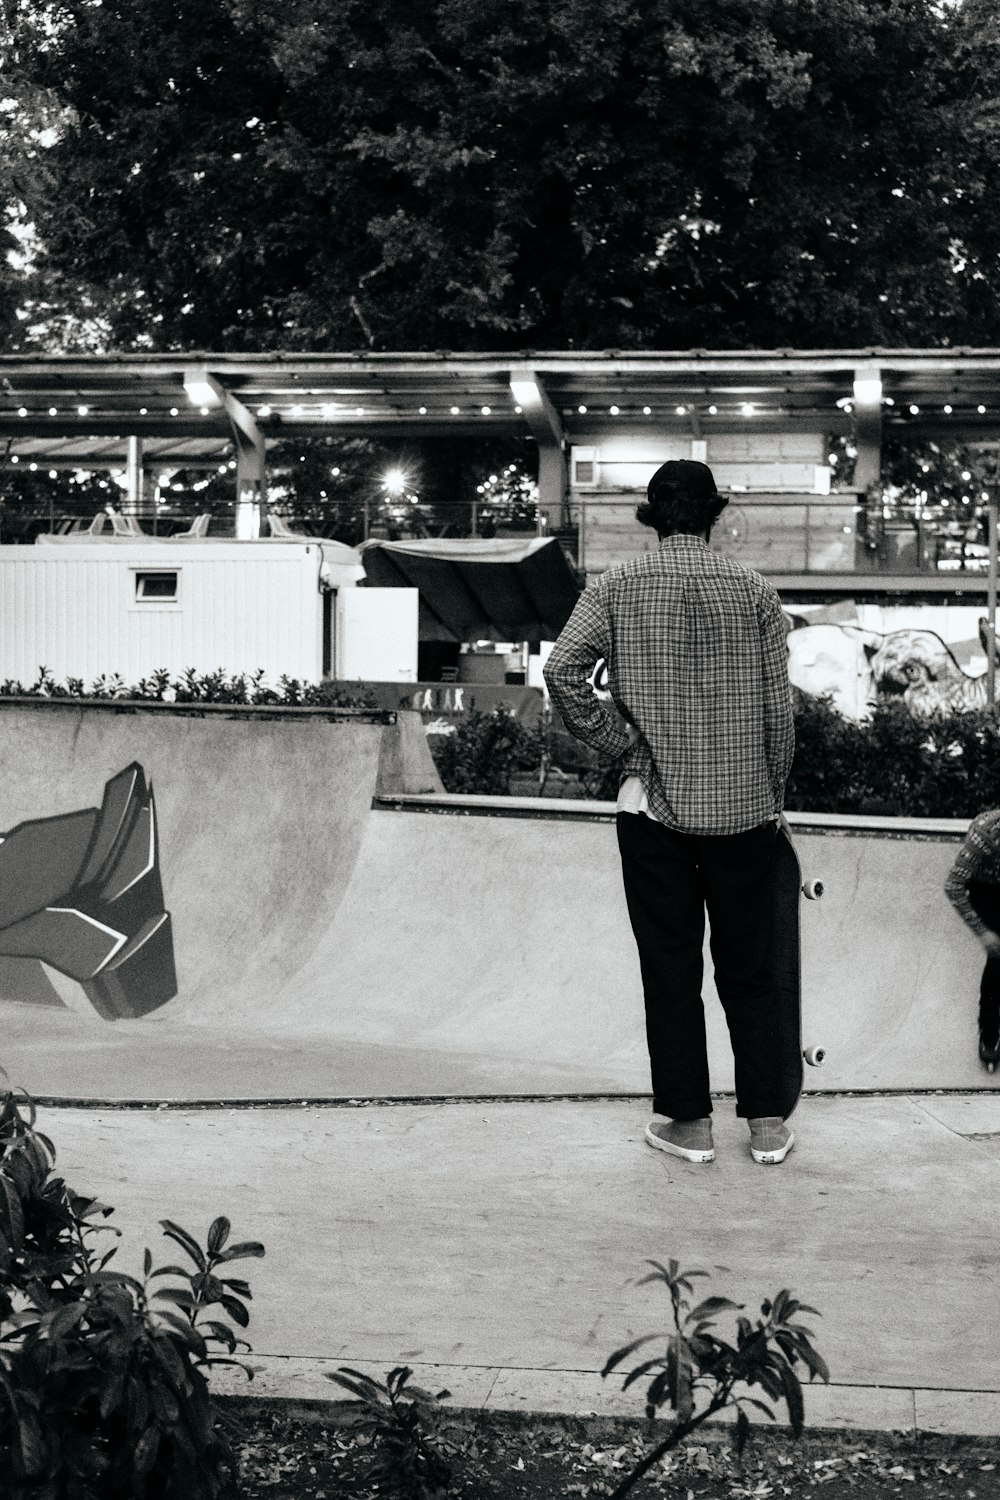 a black and white photo of a man at a skateboard park